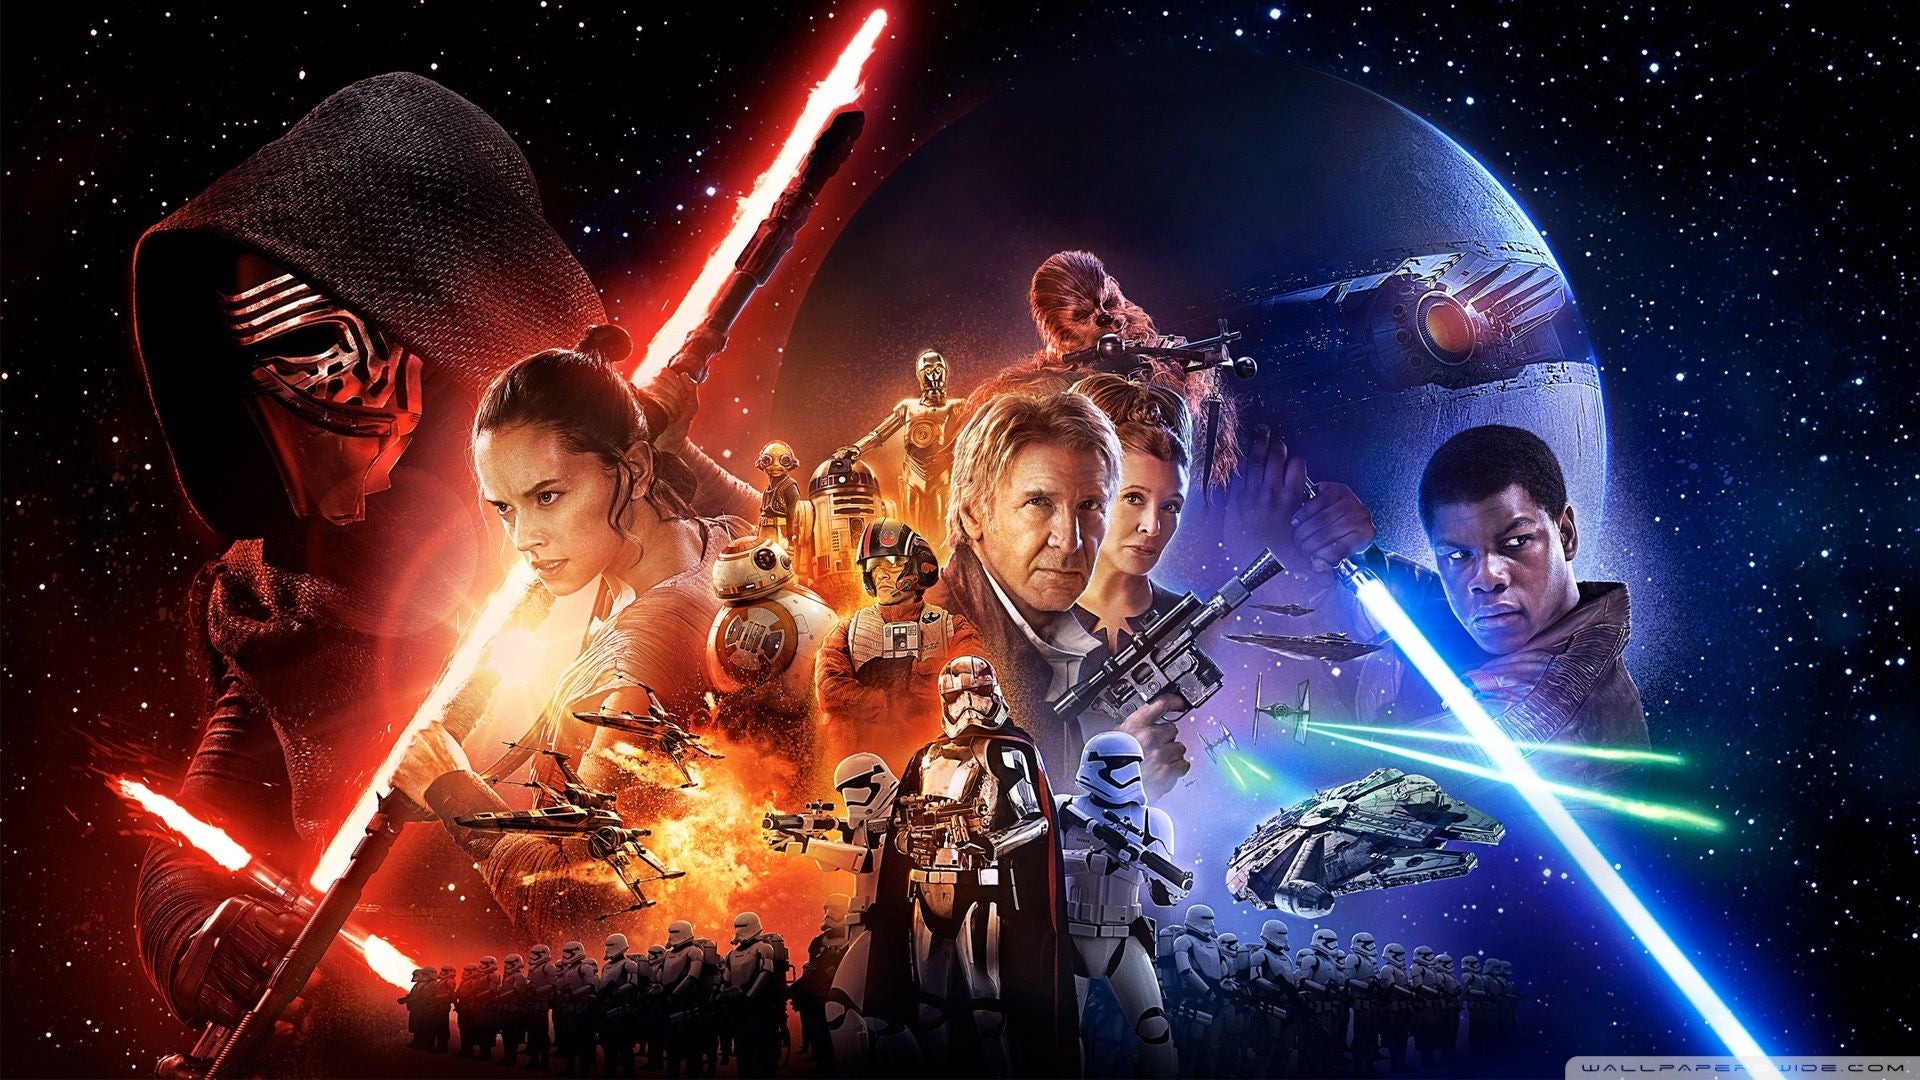 Upcoming Star Wars Movies & Series: Release Dates & Cast